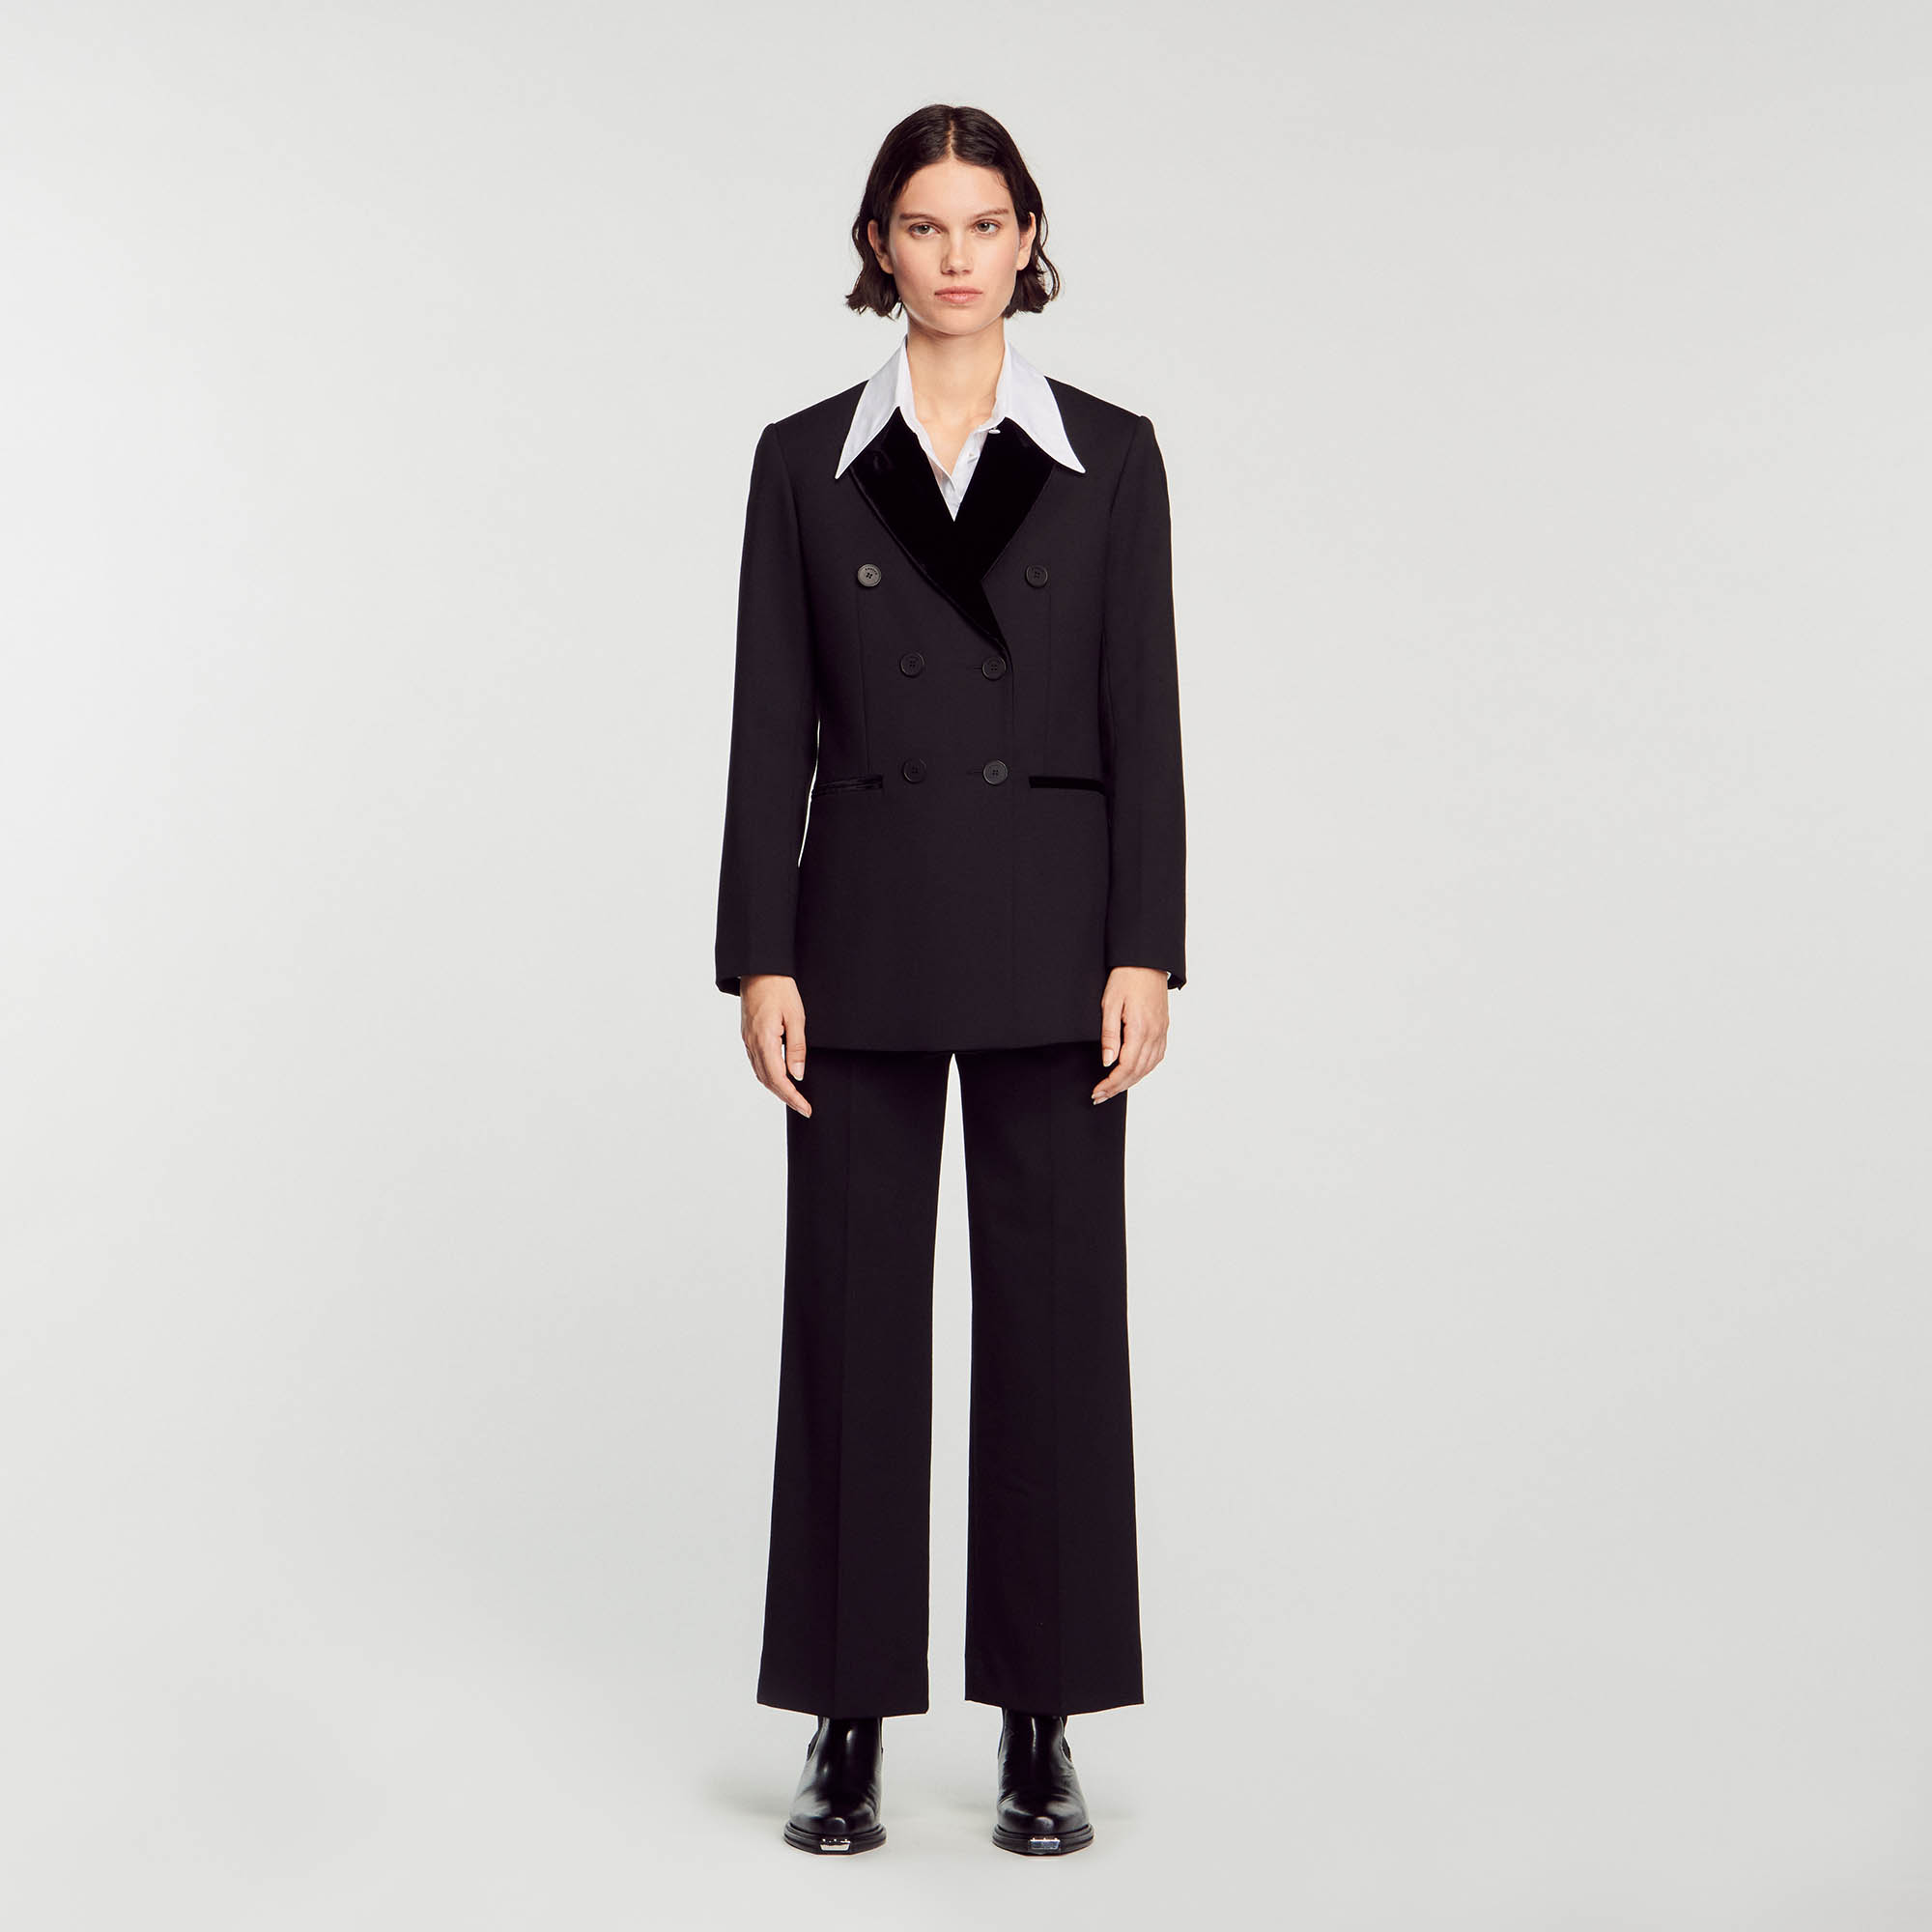 Sandro polyester Tailored jacket with a double-breasted button fastening, a wide velvet collar, long sleeves, and piped pockets